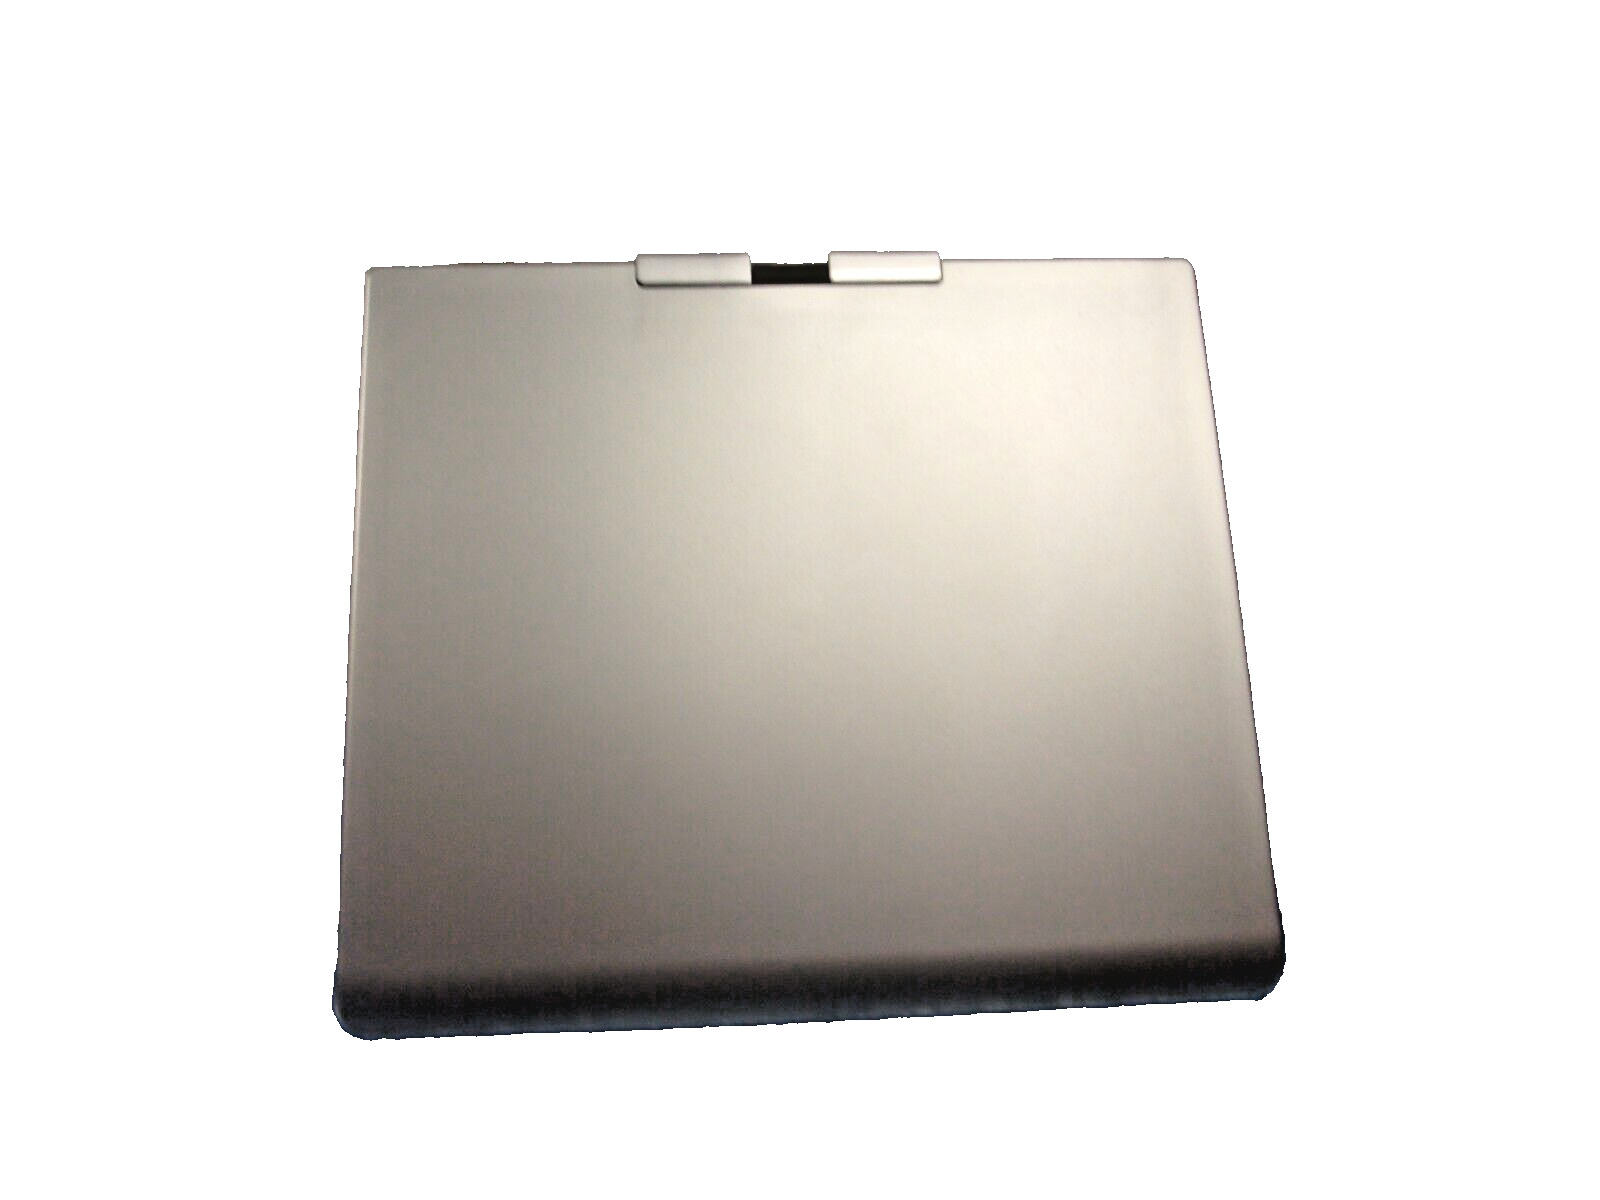 WACOM GRAPHICS TABLET CTE-640 SILVER USB CONNECTION WITH STYLUS.